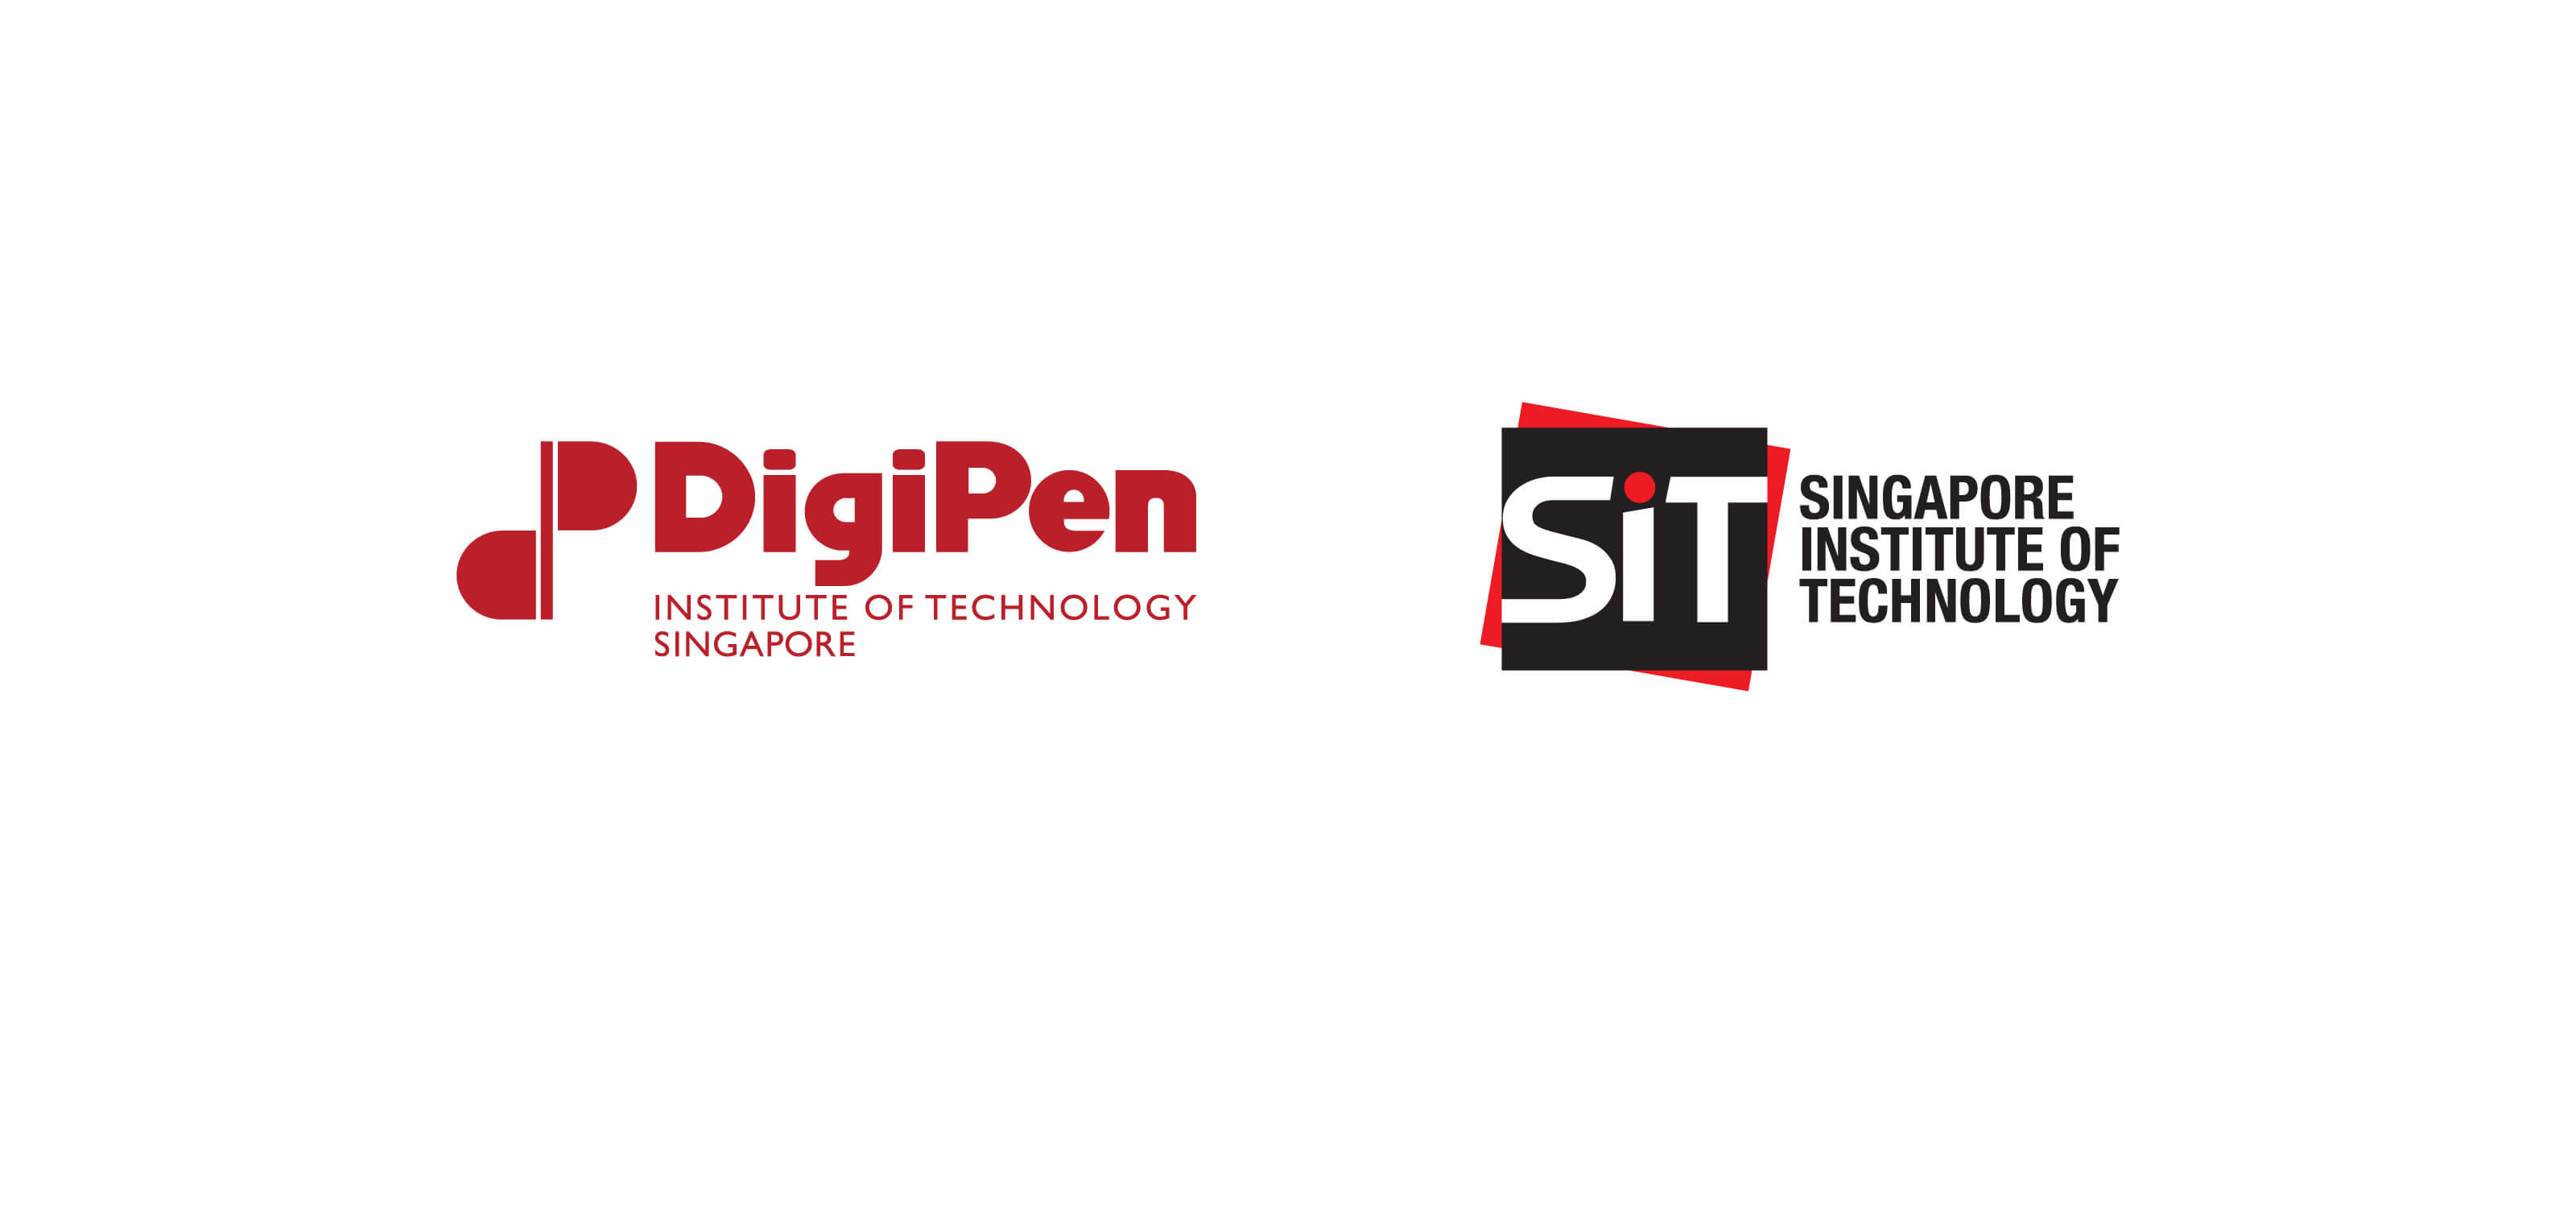 DigiPen Institute of Technology and Singapore Institute of Technology logos